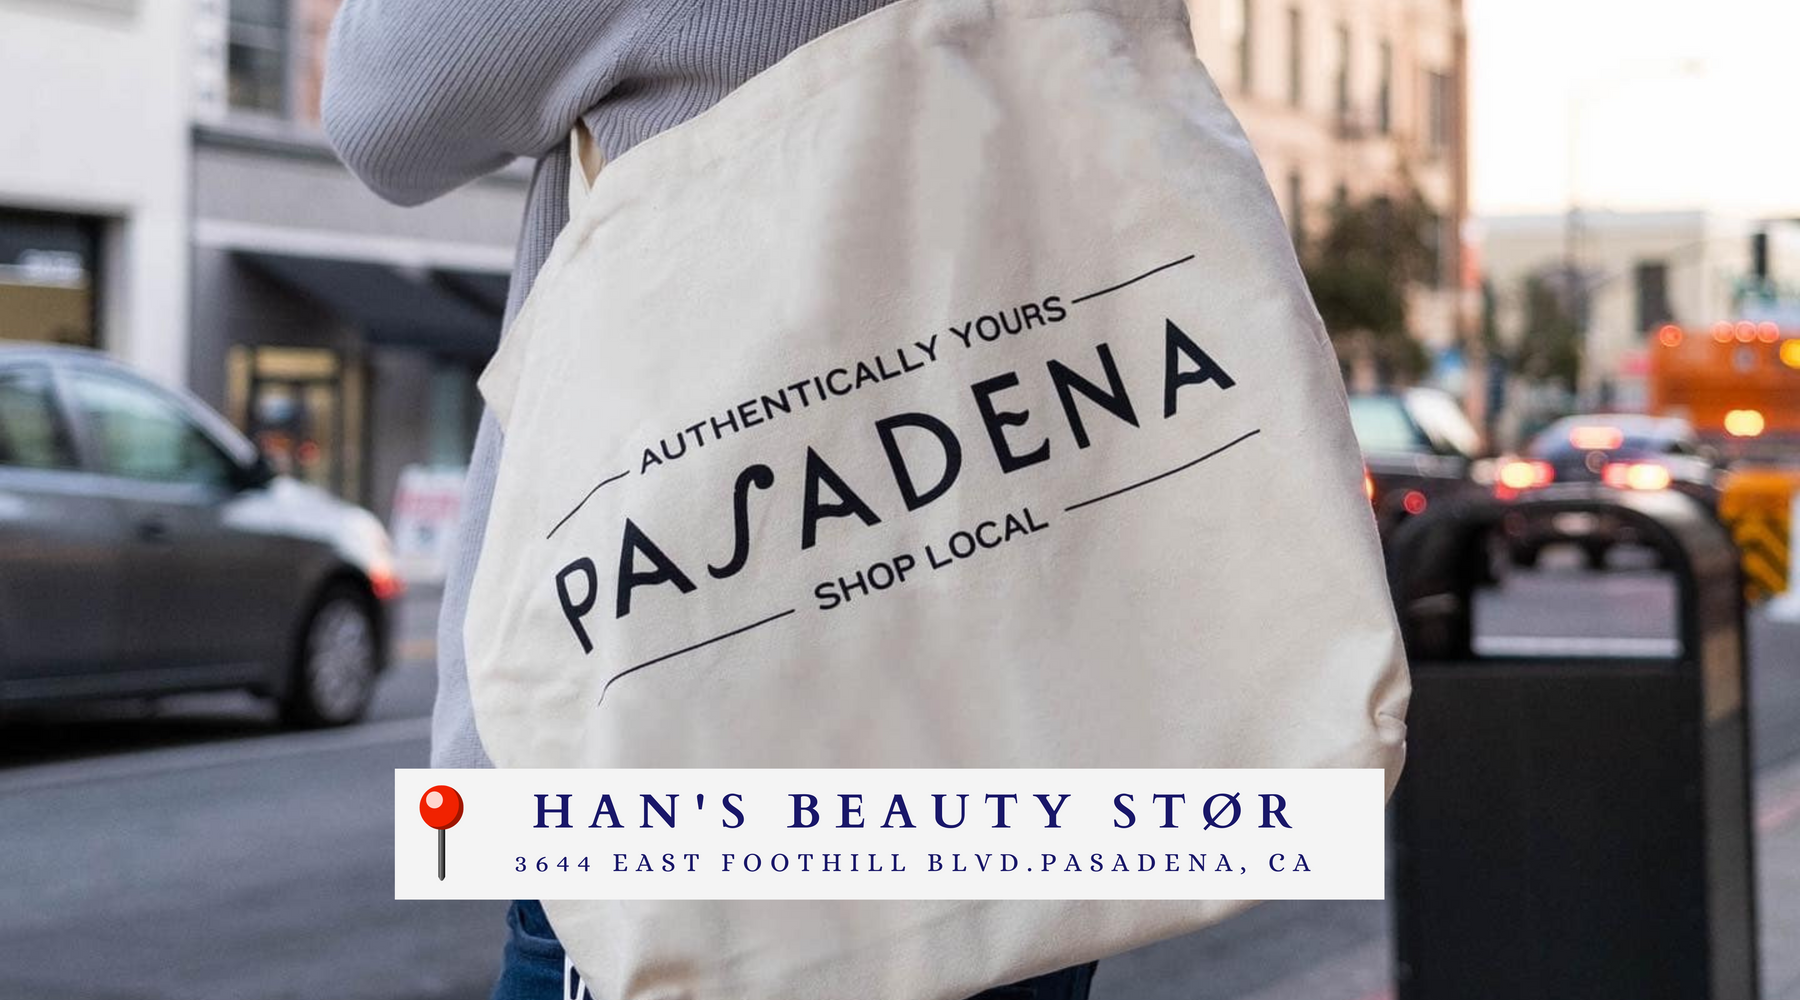 Han's Beauty Stør is celebrating Small Business Saturday with #VisitPasadena and will be giving out free tote bags on a first-come, first-serve basis starting Nov. 25th, 2023.